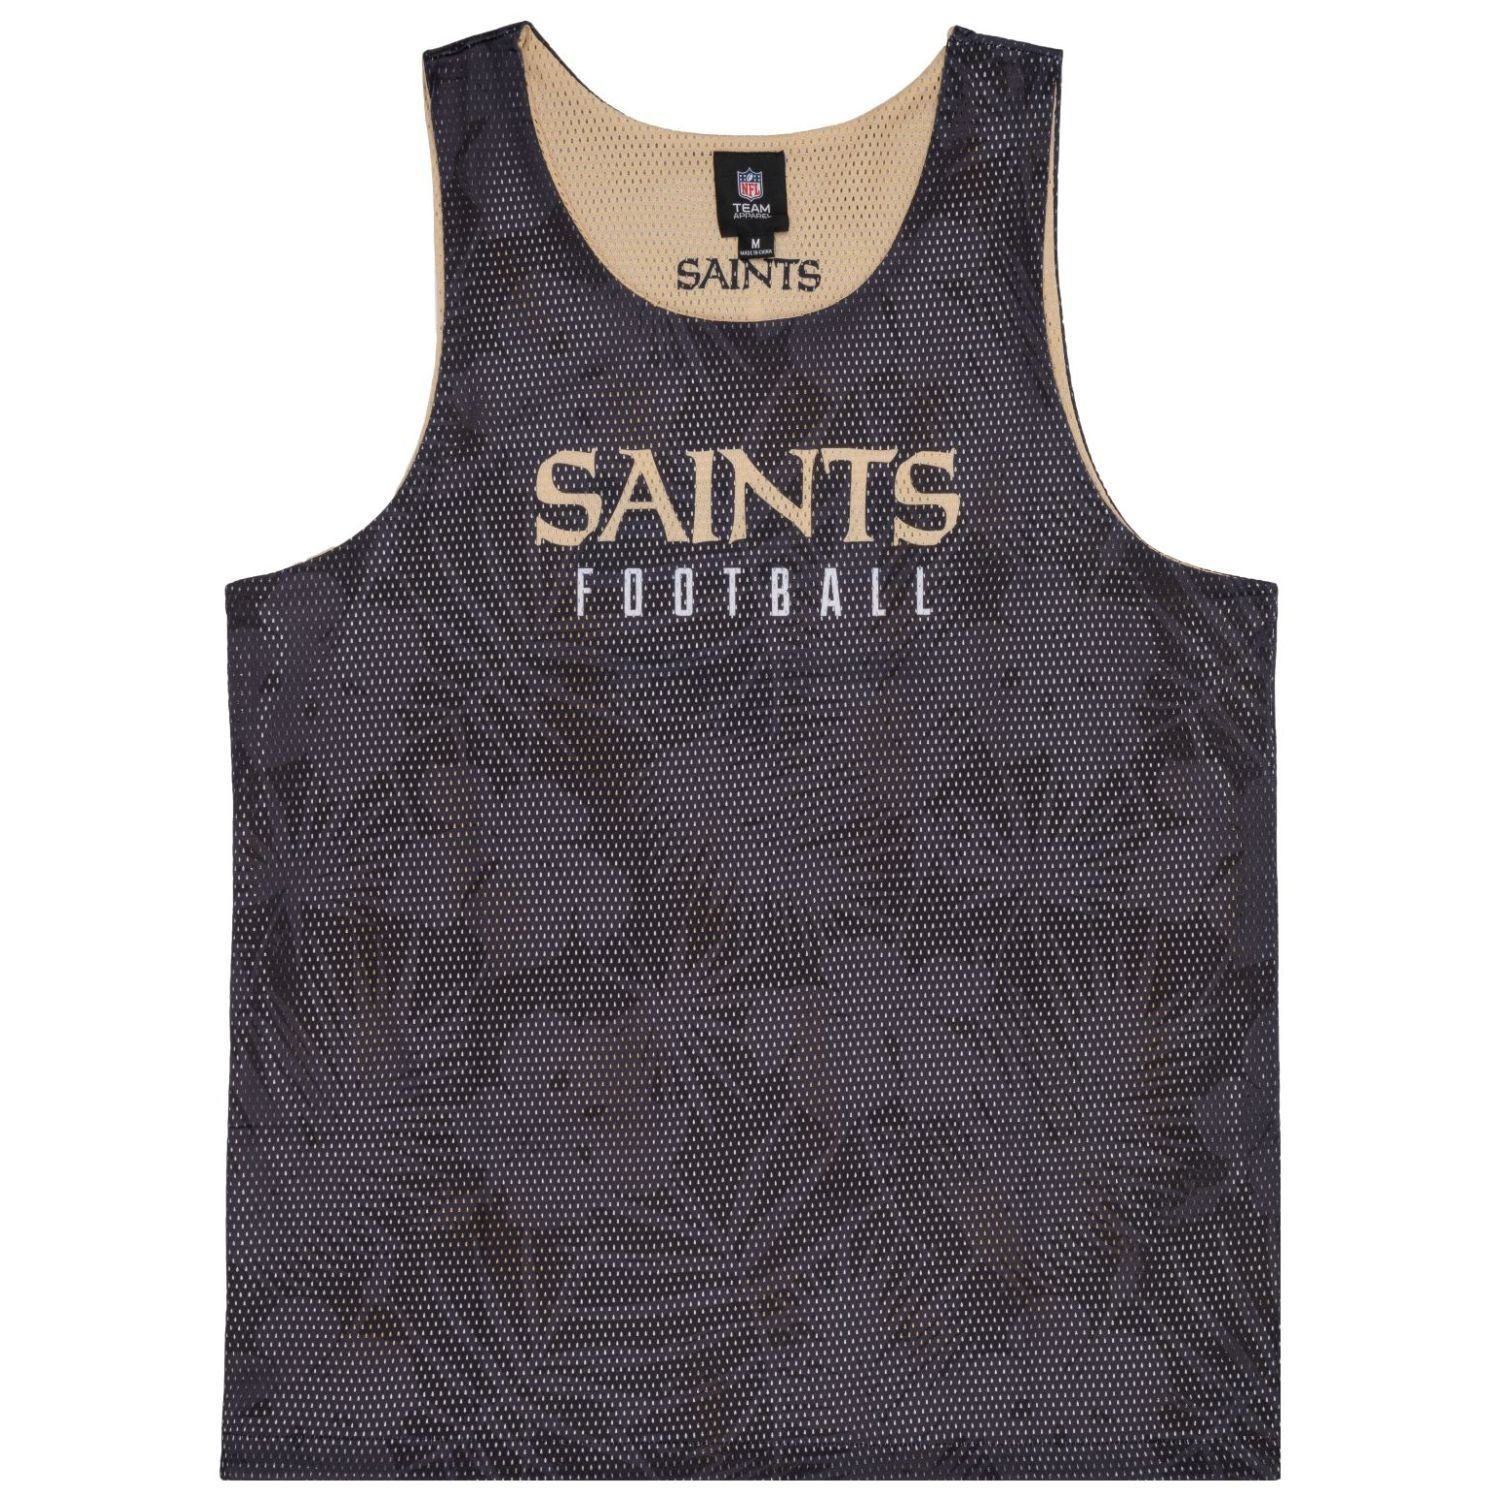 Forever Collectibles Muskelshirt Reversible Saints Floral New Orleans